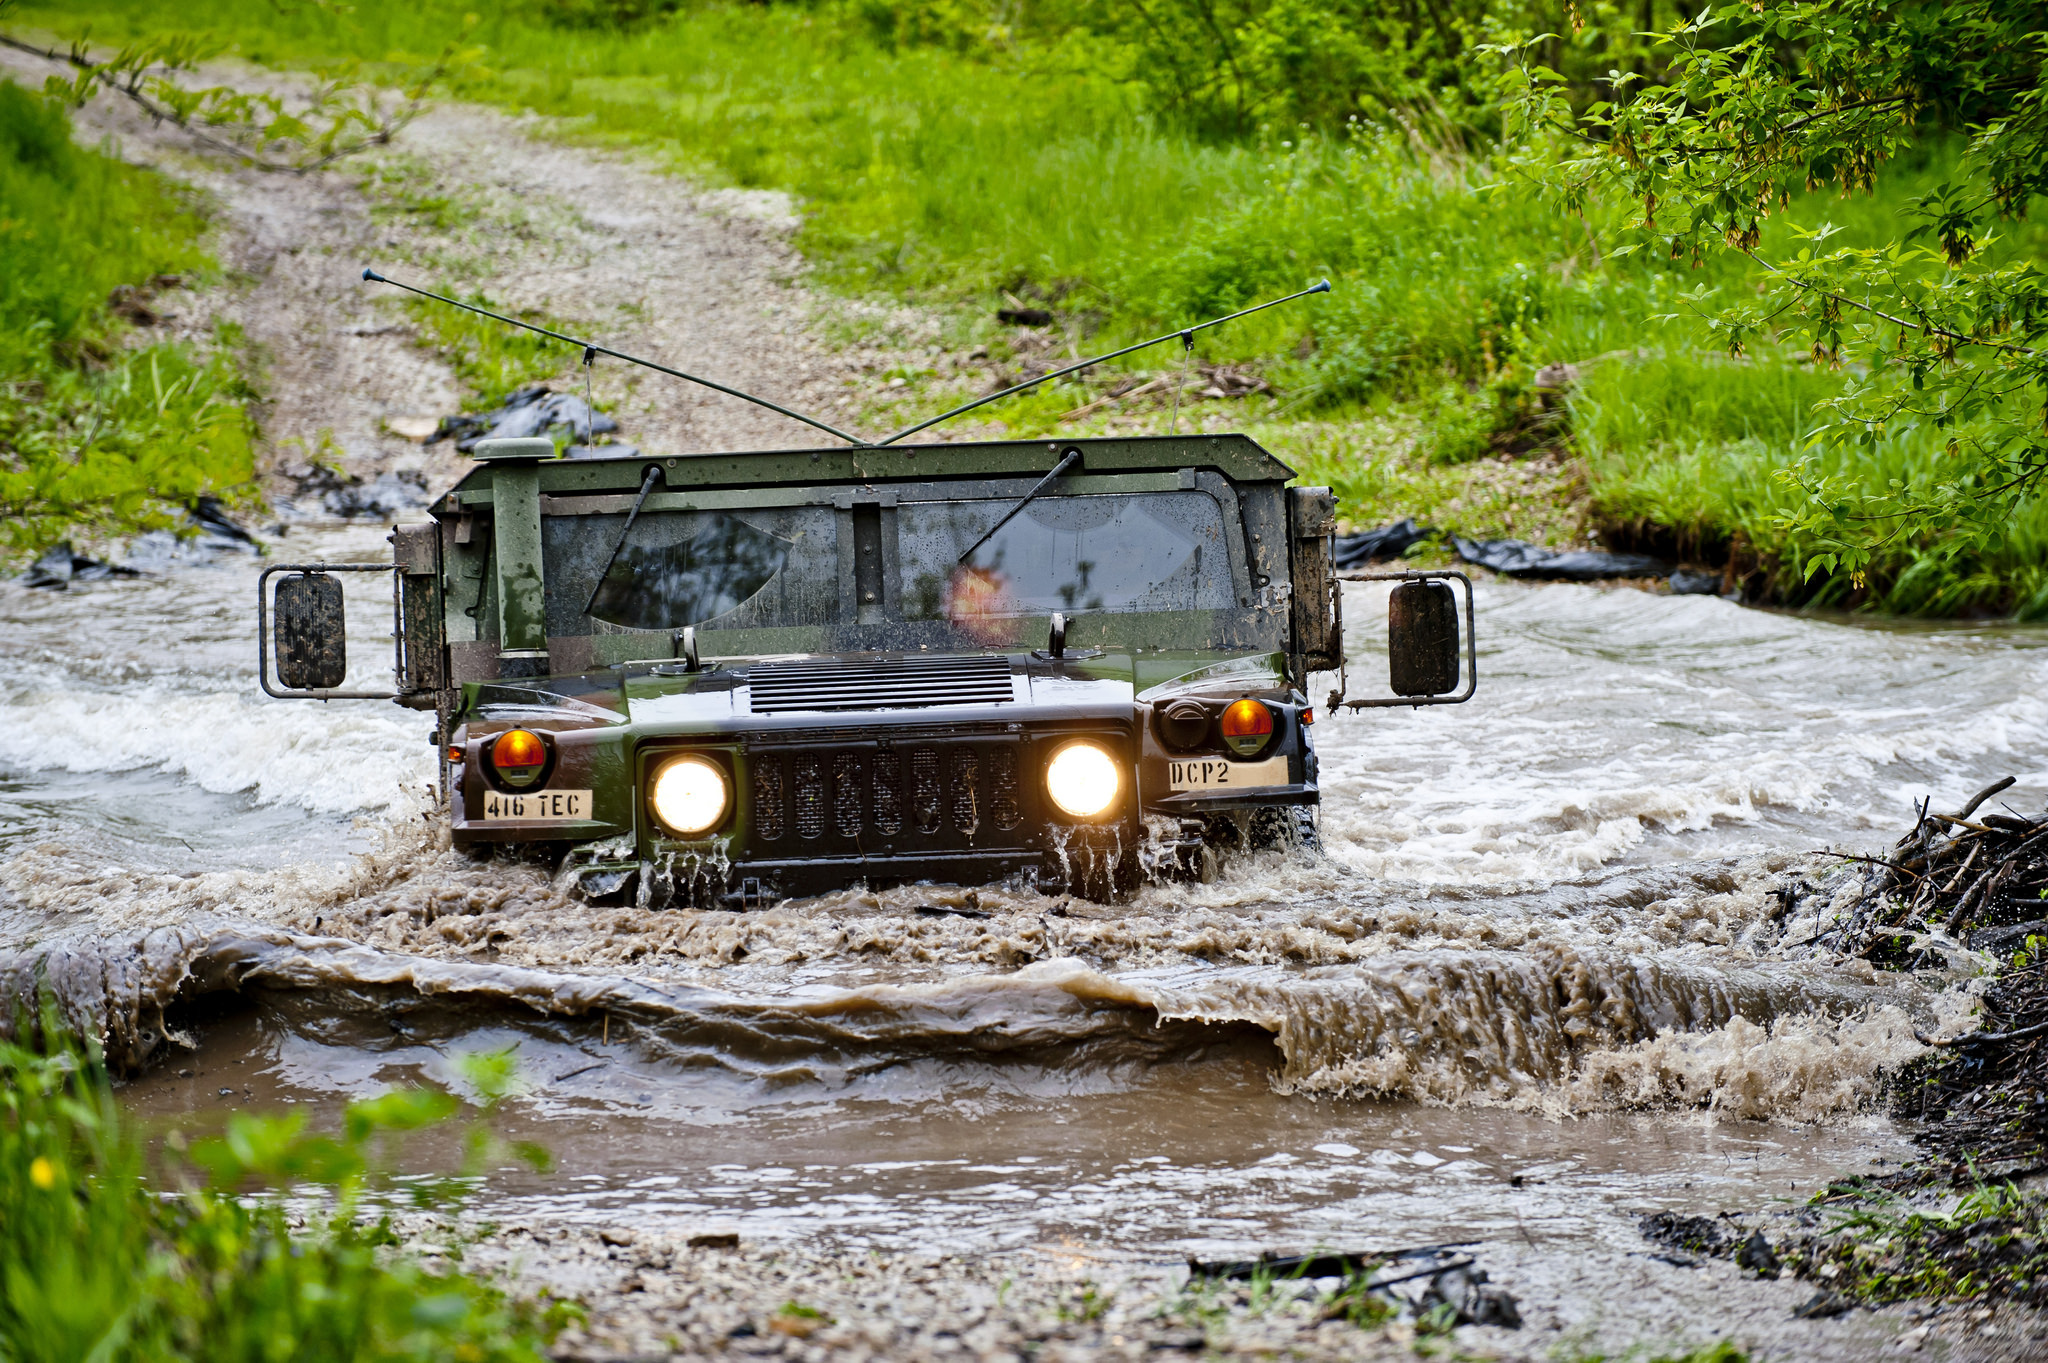 Off-road Driving: Car driving through swamp, SUVs with higher ground clearance, Off-road use. 2050x1370 HD Wallpaper.